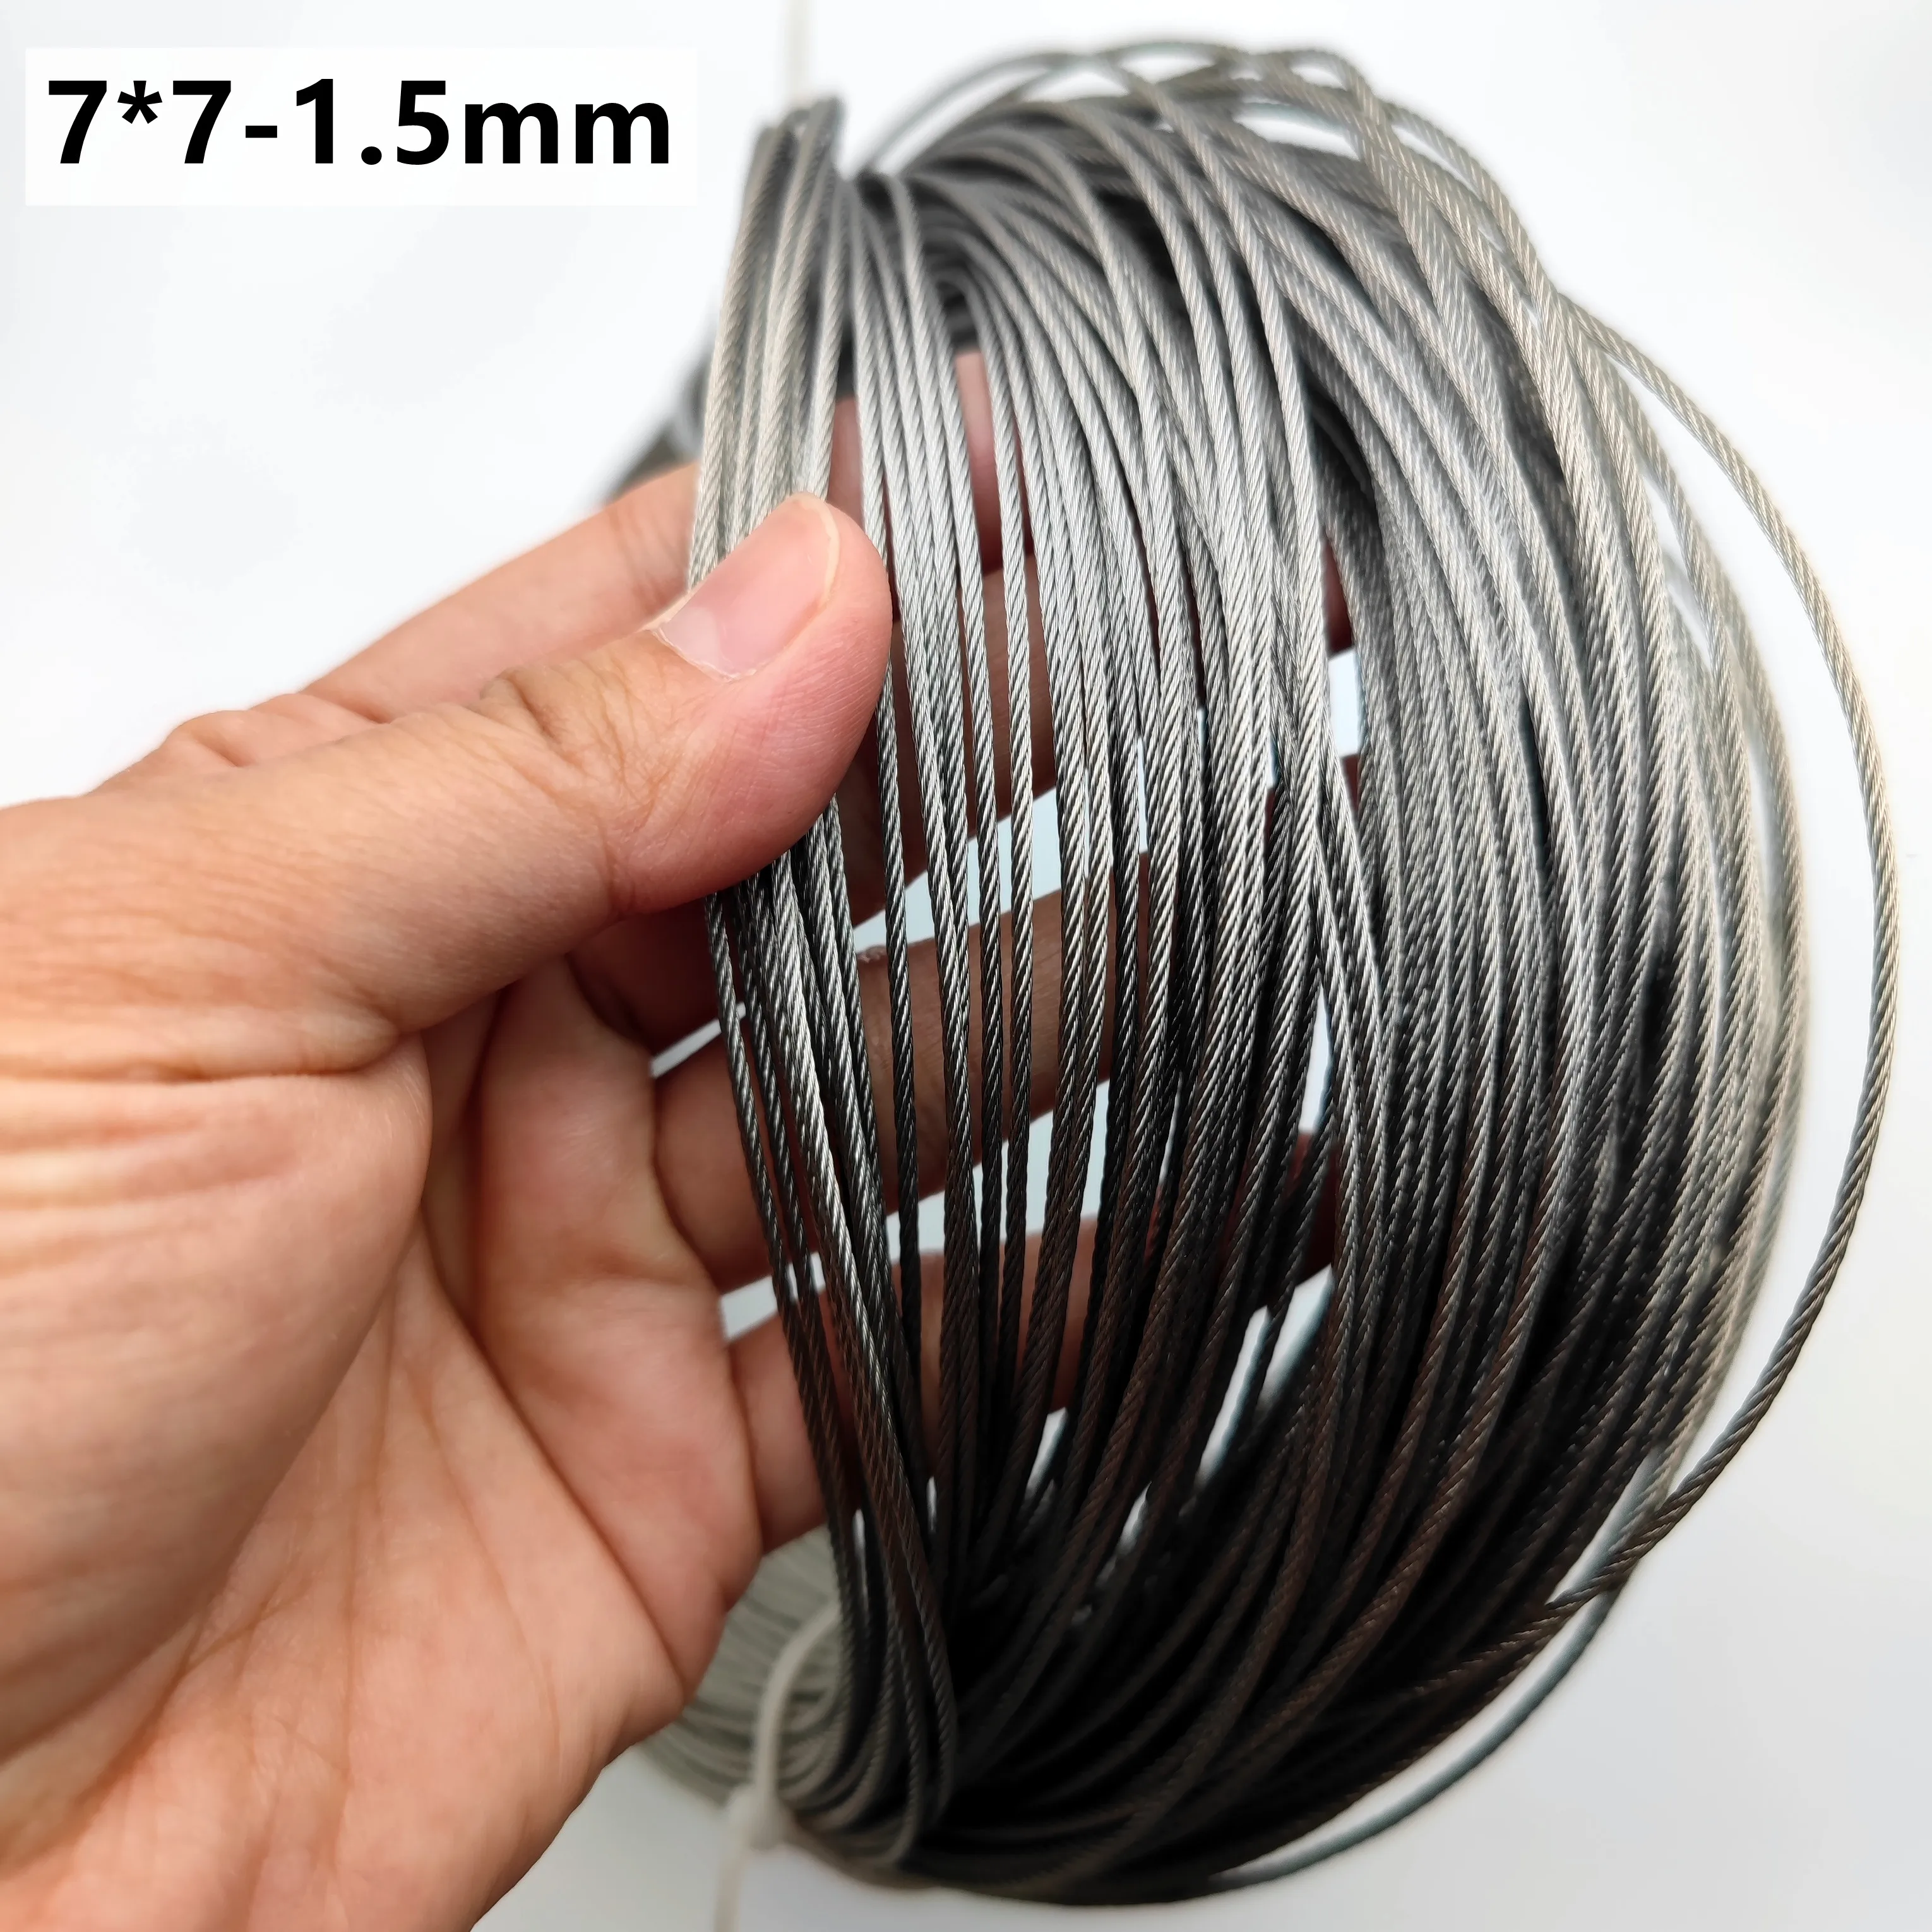 50M/100M/200M 1.5mm Diameter 7X7 Construction 304 Stainless steel Wire rope Alambre Softer Fishing Lifting Cable 50m 2 5mm diameter 7x19 construction 304 stainless steel wire rope alambre softer fishing lifting cable